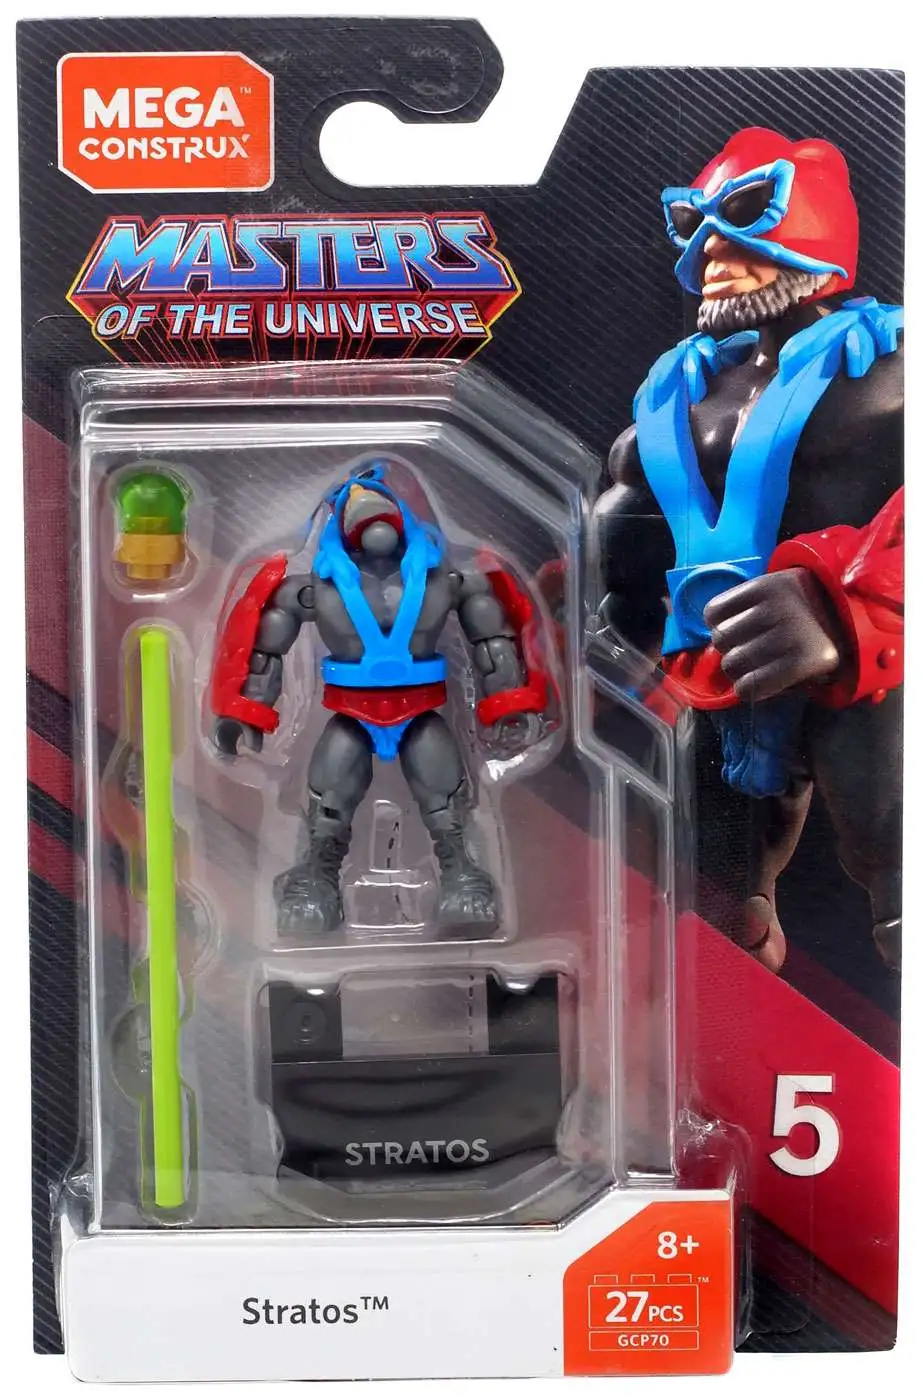 Stratos Mega Construx Masters of the Universe Figure Pack 